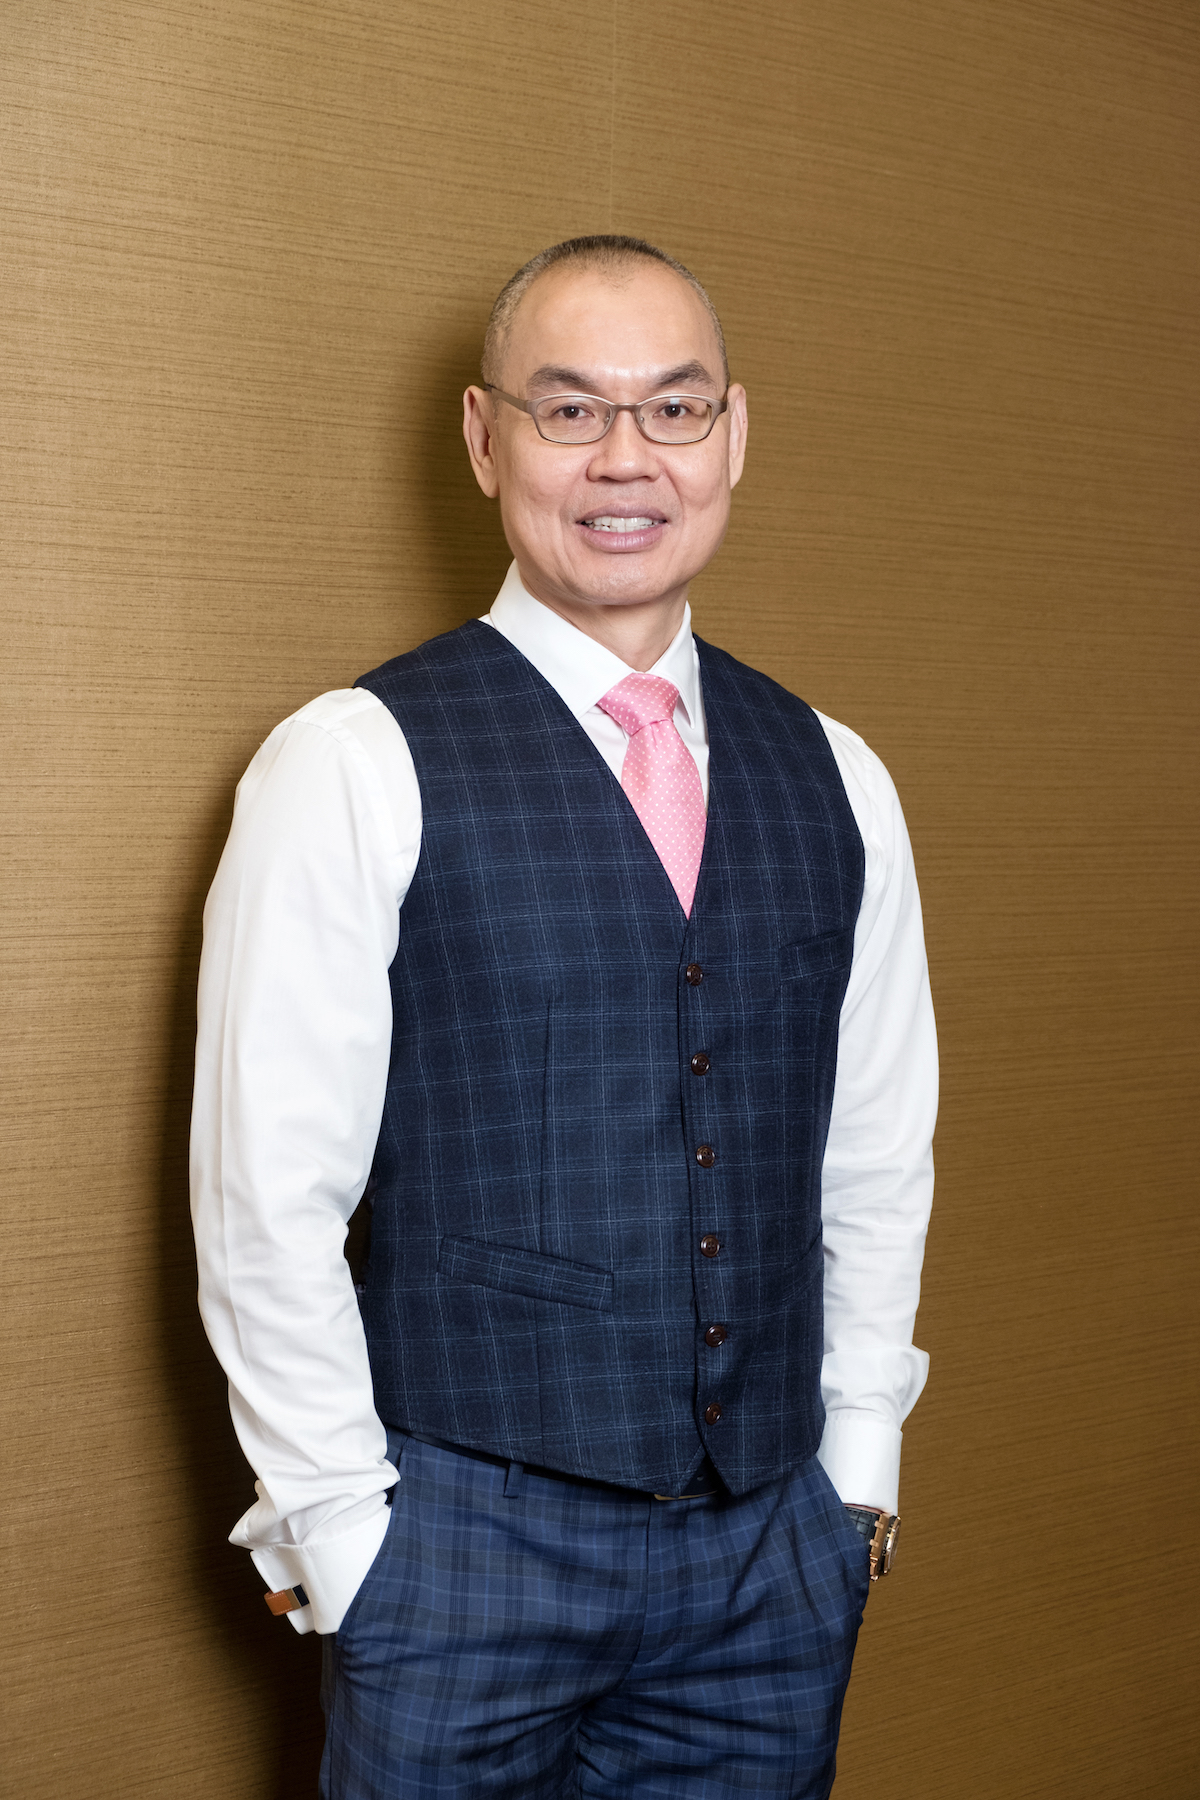 Chye Huat, CEO of Howden